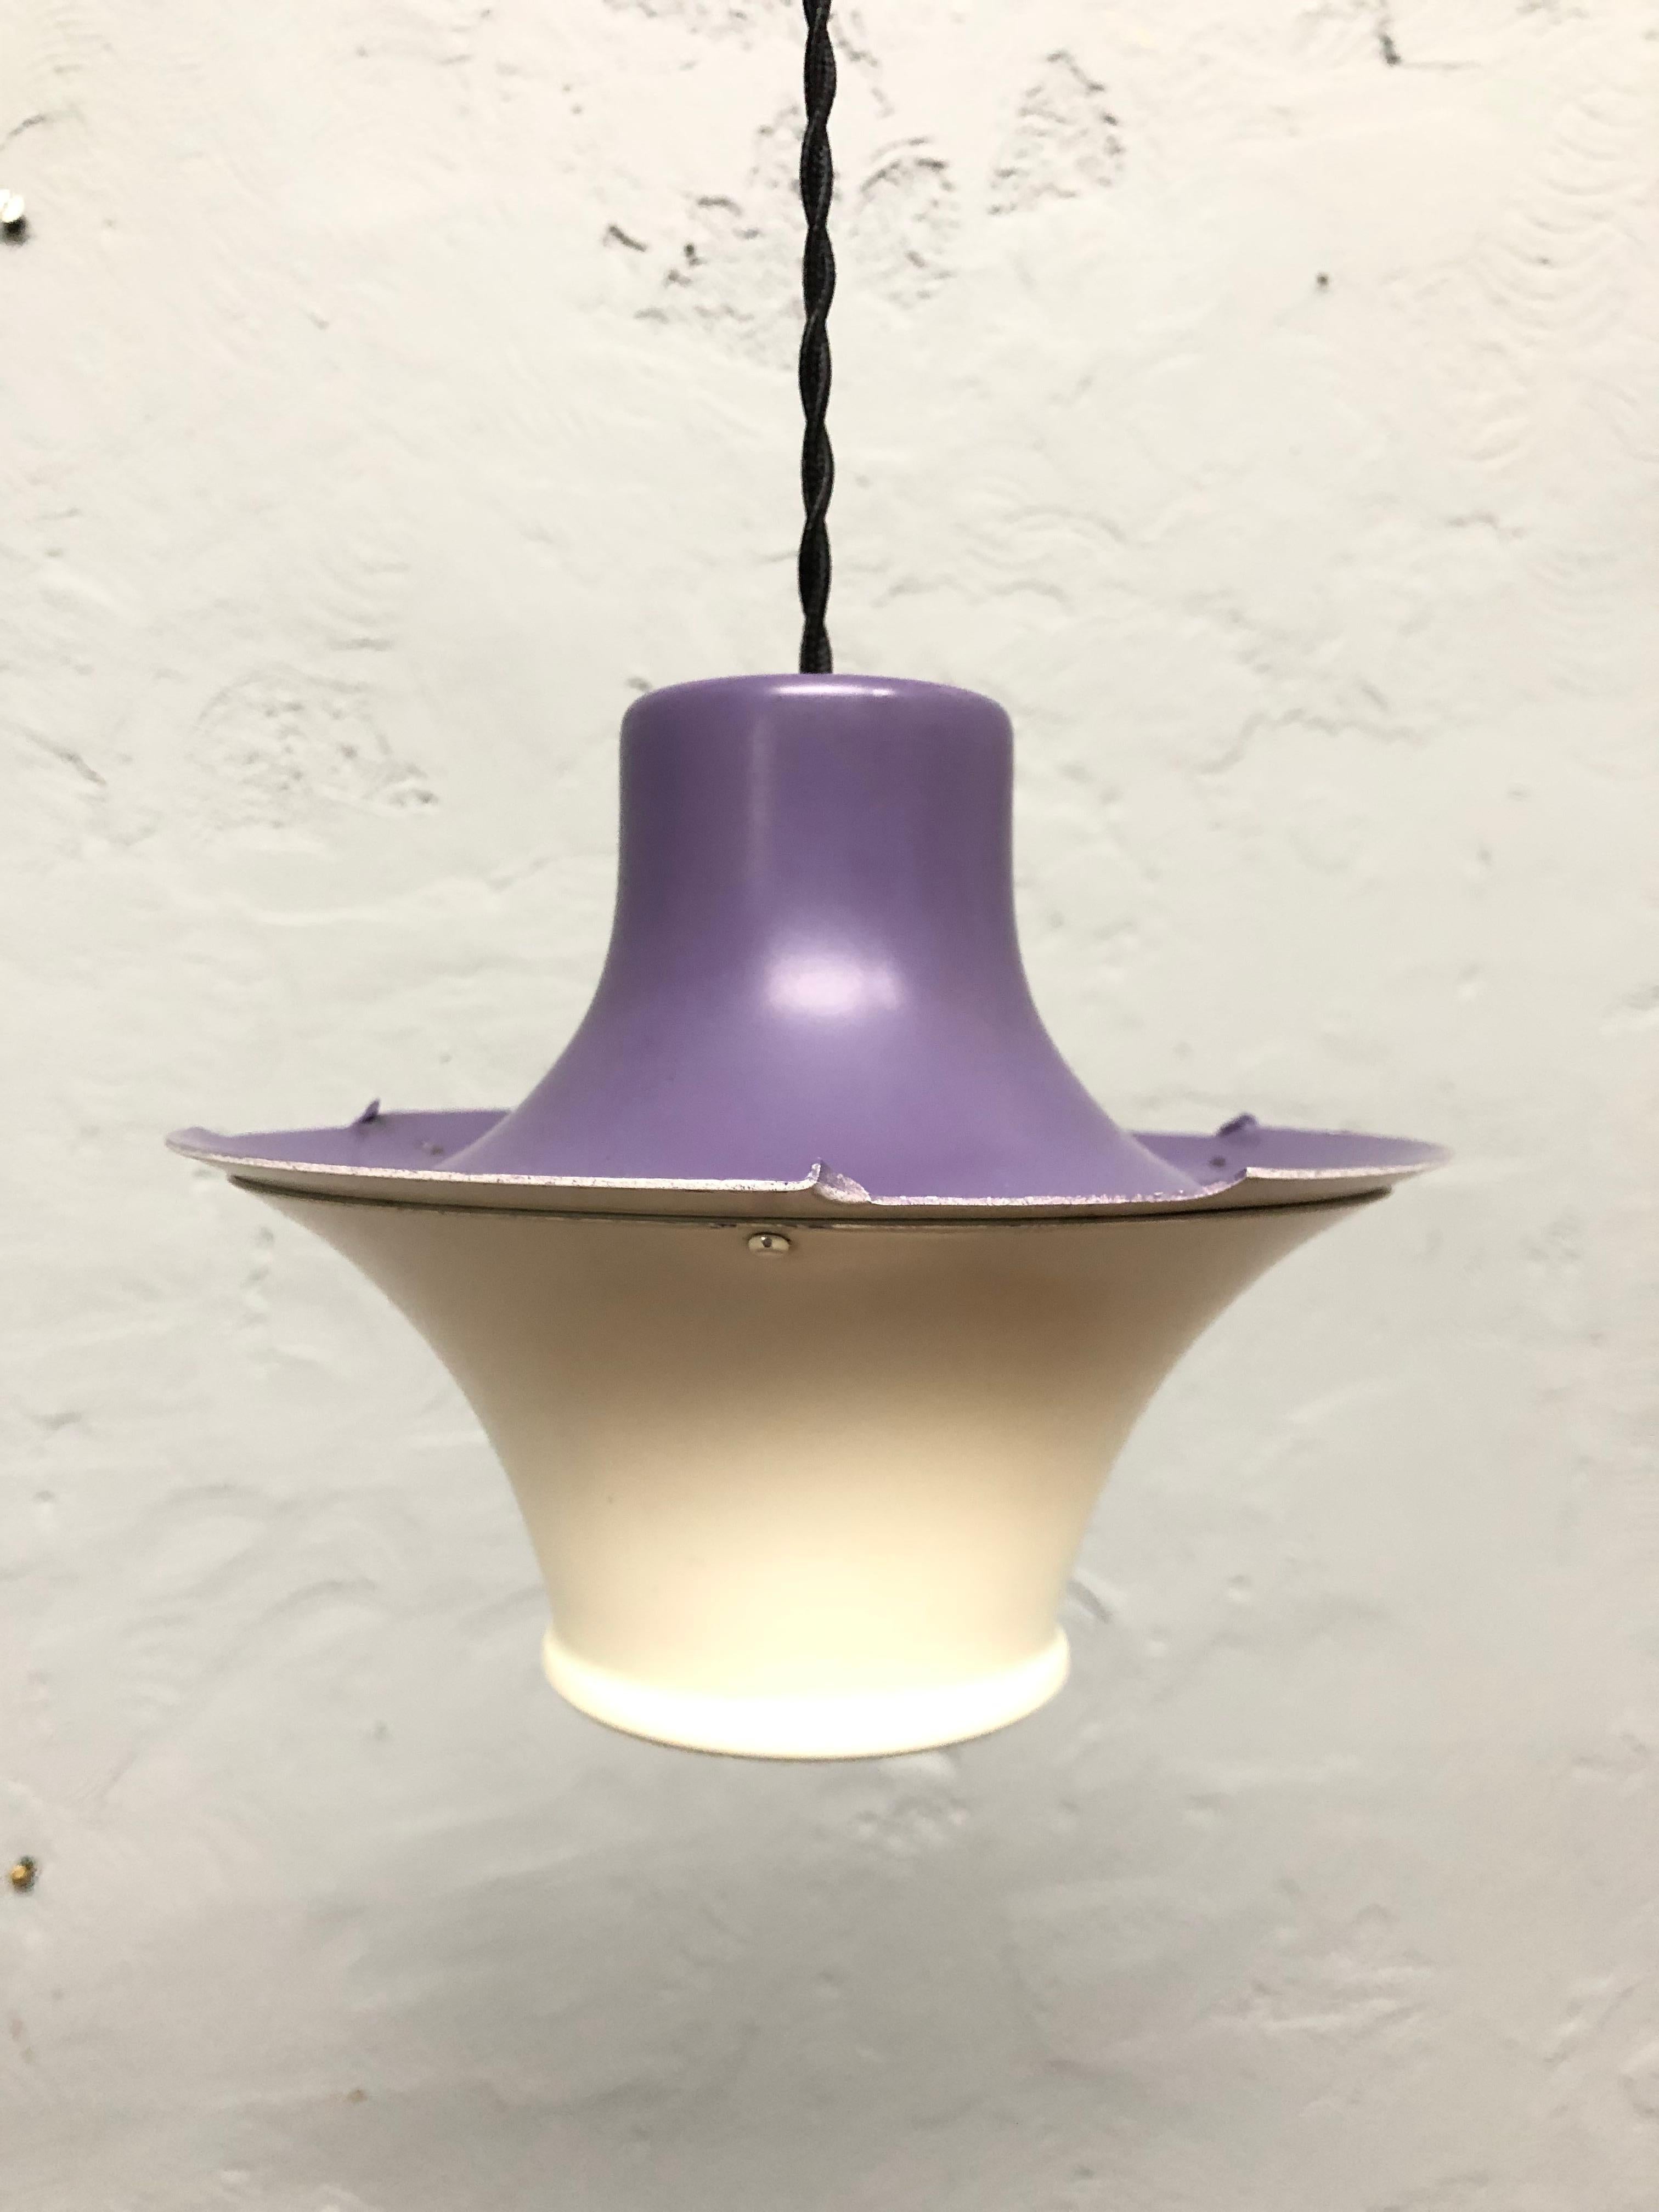 Aluminum Iconic Rare 1st Edition Poul Henningsen PH 5 Chandelier Pendant Lamp from 1958 For Sale